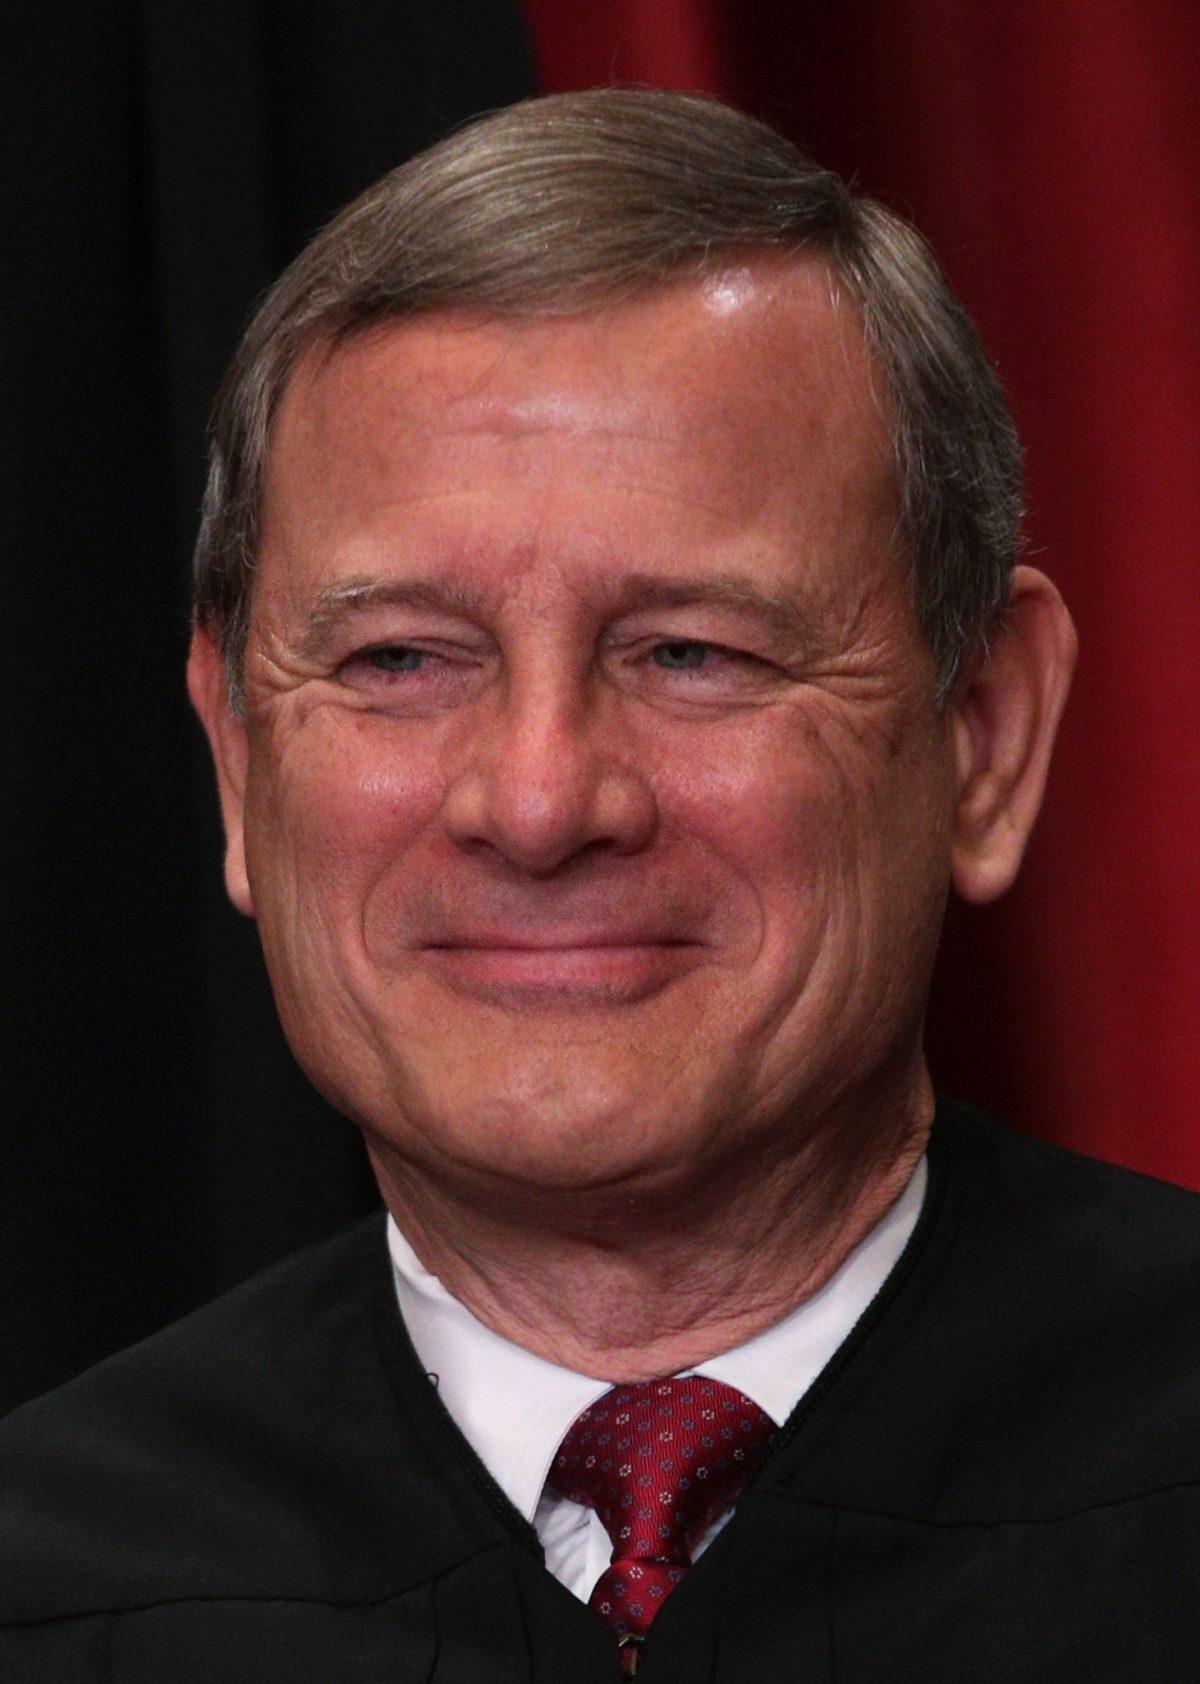 U.S. Supreme Court Chief Justice John G. Roberts in the East Conference Room of the Supreme Court in Washington on June 1, 2017. (Alex Wong/Getty Images)